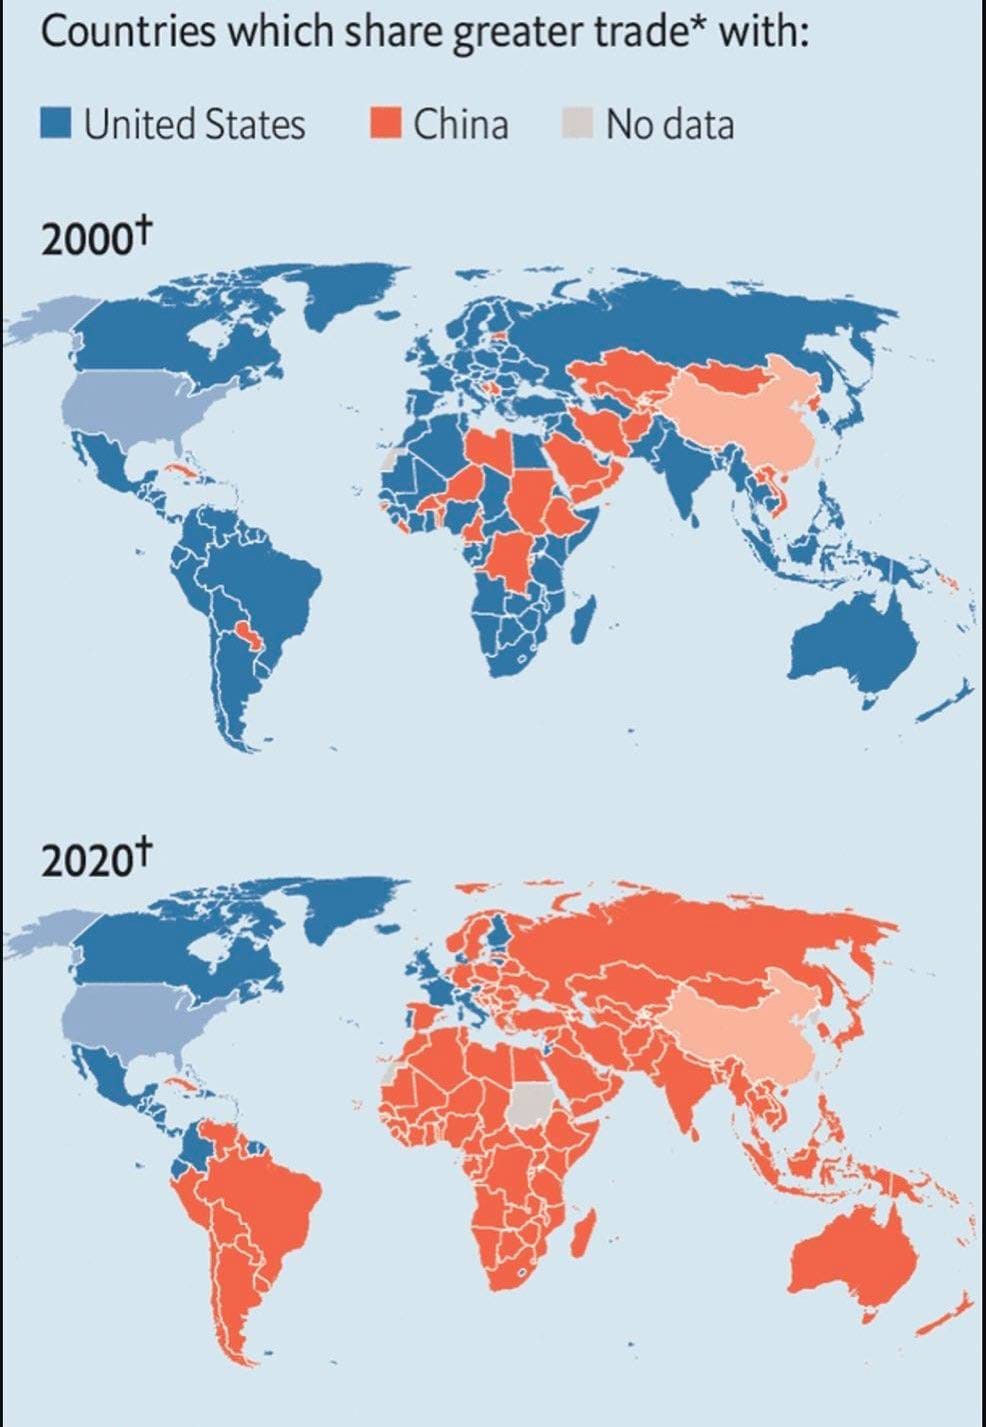 May be an image of map and text that says 'Countries which share greater trade* with: United States China No data 2000+ 2020+'